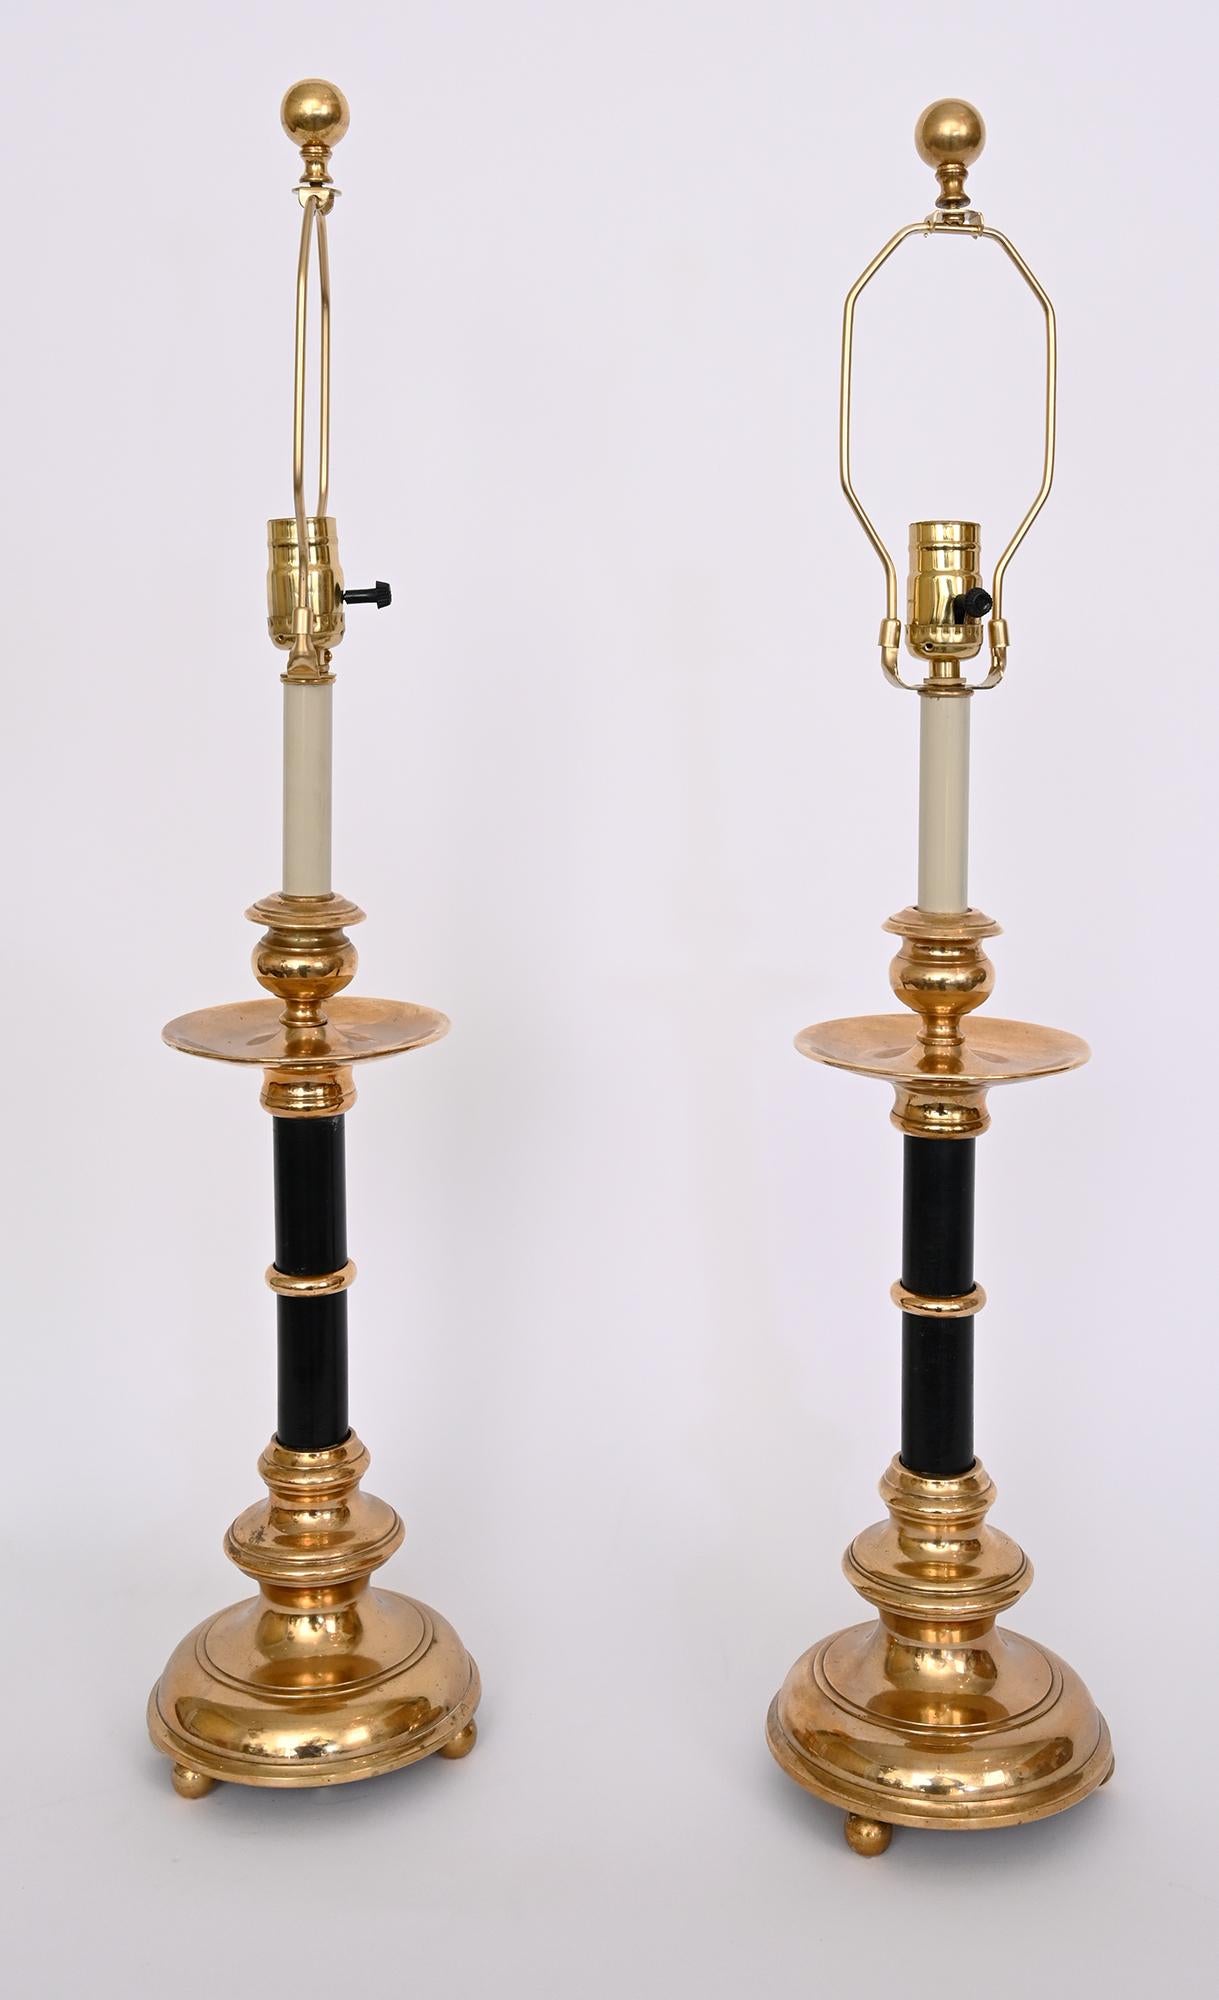 A pair of Swedish bronze and ebonized wood candlesticks by the Swedish foundry Skultuna c. 1900. 
Bases have individual signature codes stamped on the underside.
Mounted as lamps with adjustable harp fitting and single medium socket.
Shades not